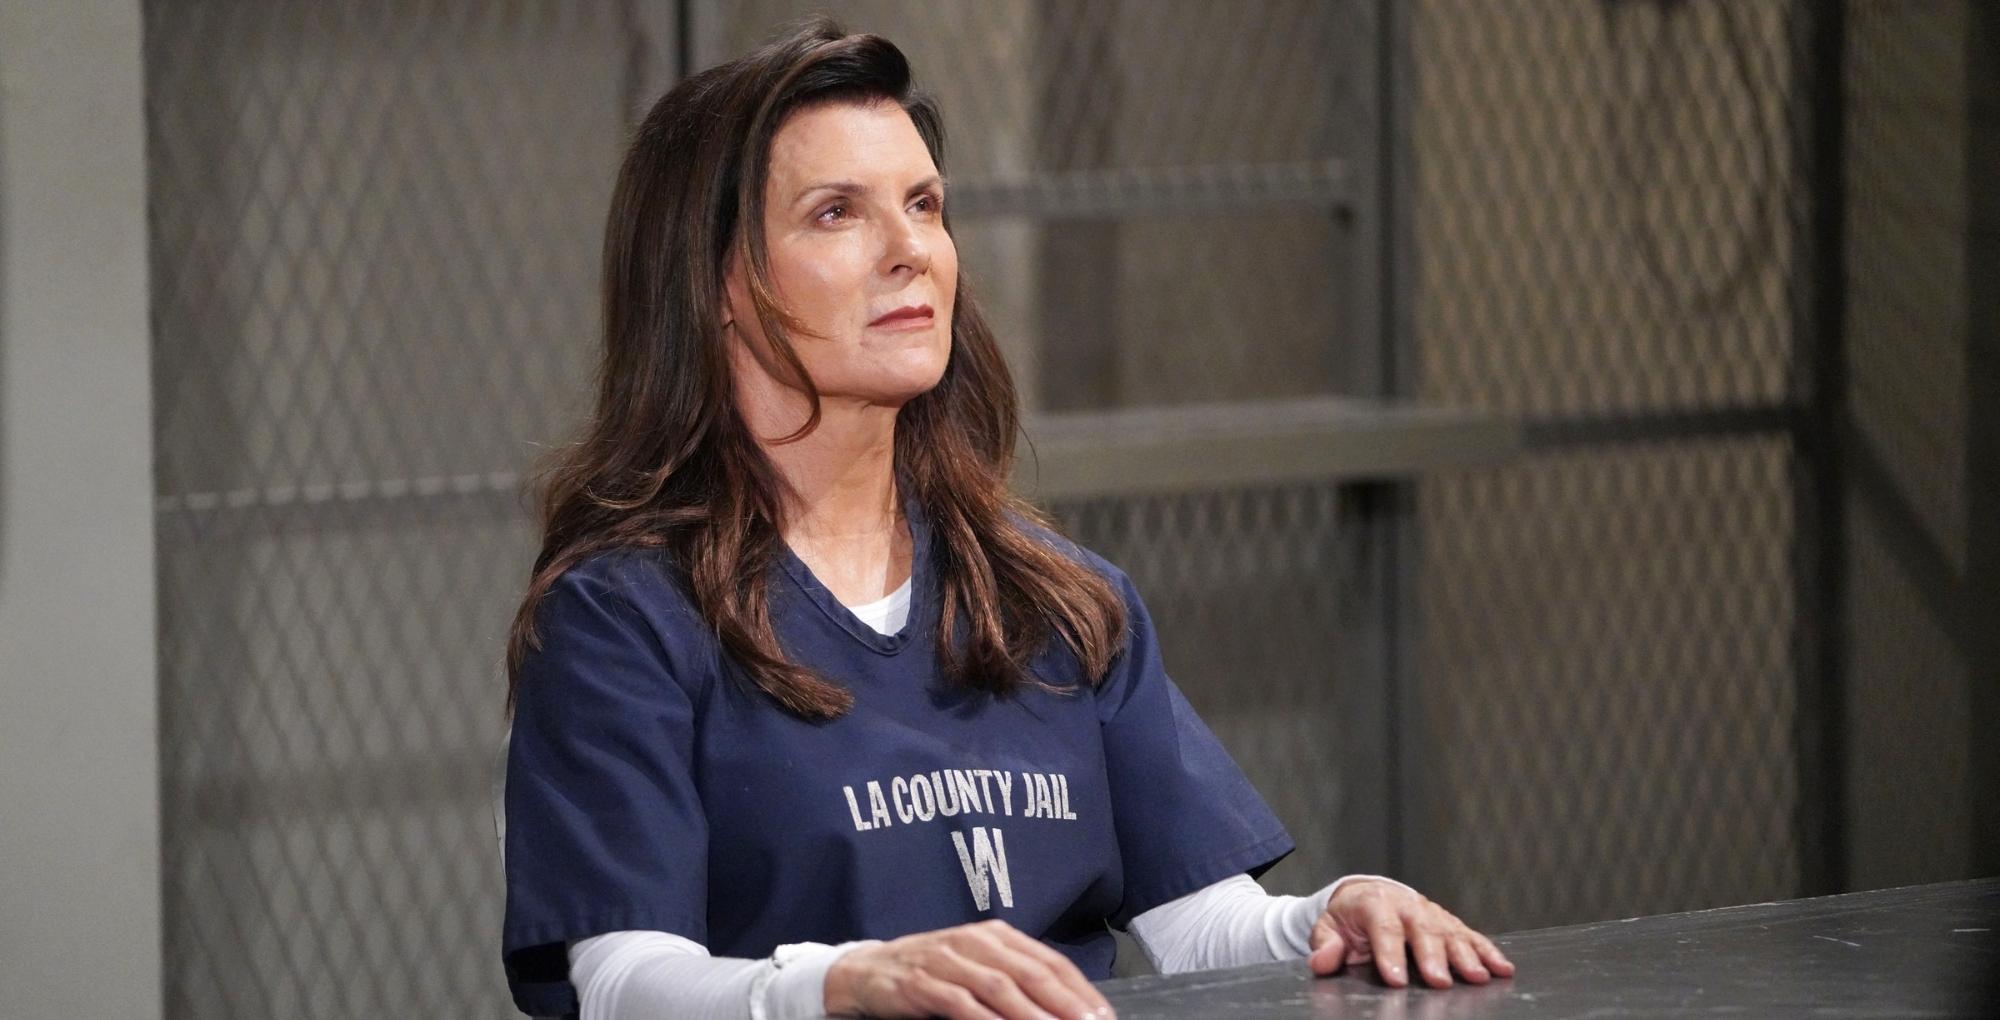 the bold and the beautiful spoilers for july 10, 2023 have sheila carter back but still in jail.